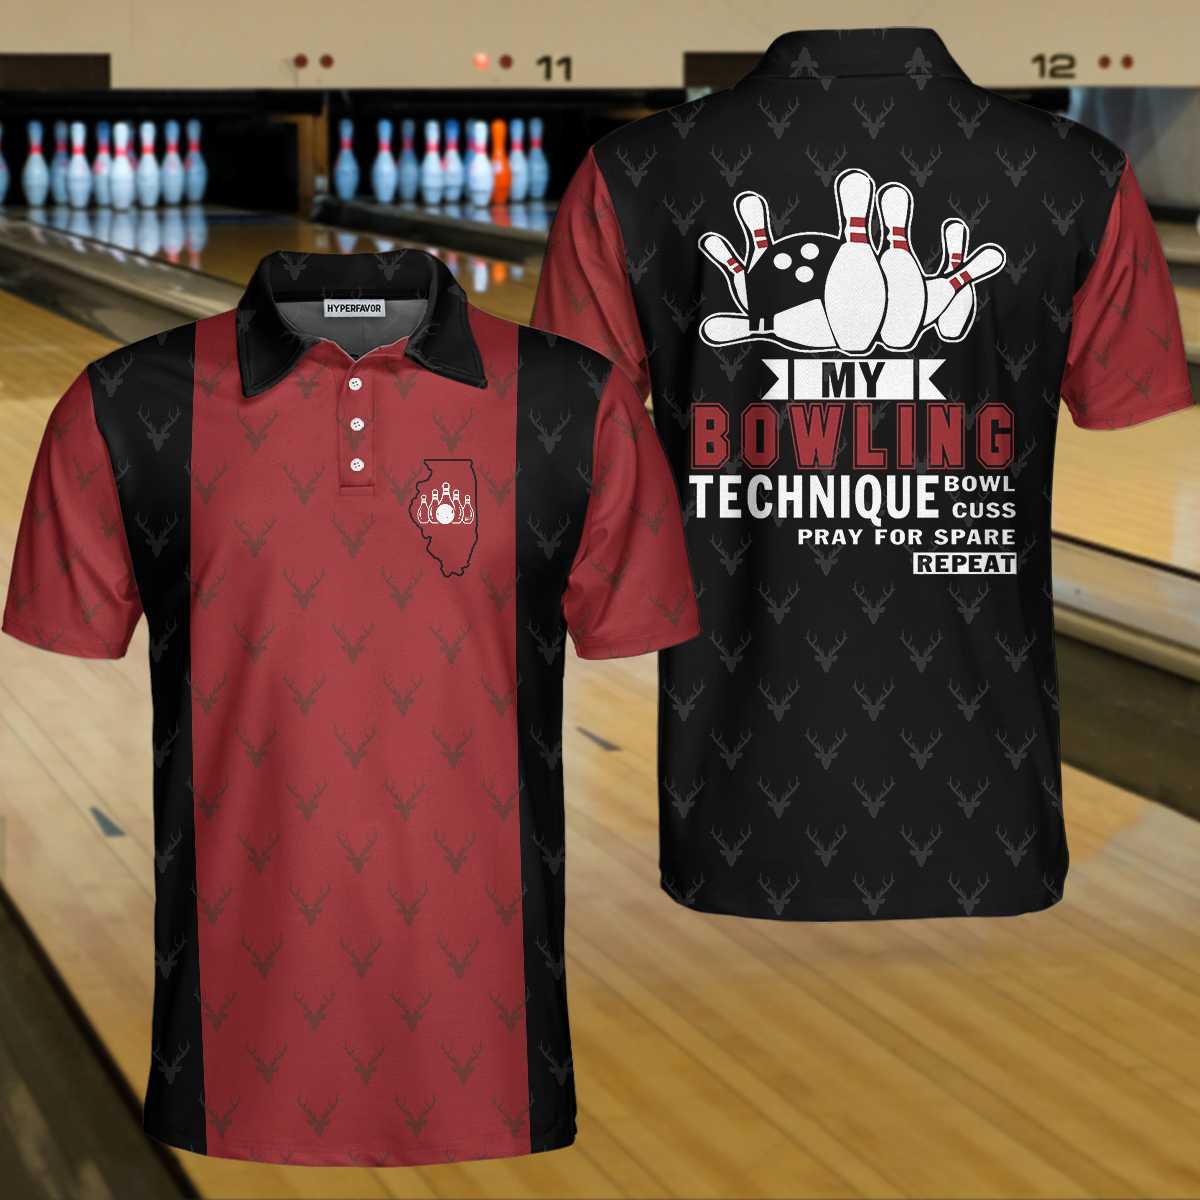 My Bowling Technique Illinois Bowling Polo Shirt/ Red And Black Bowling Shirt For Men Coolspod